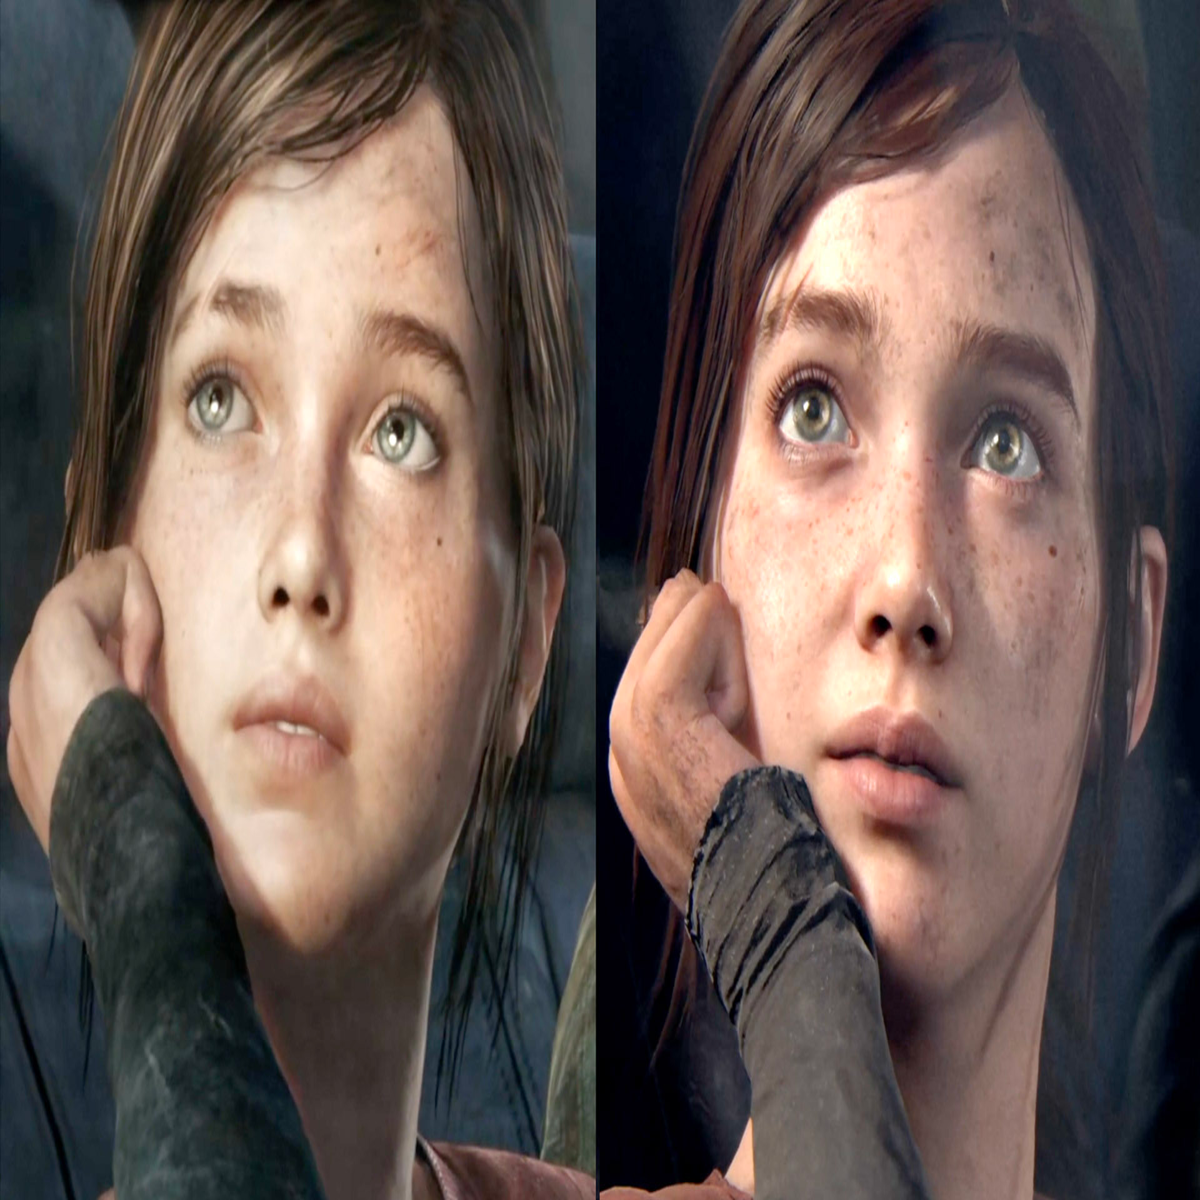 The Last of Us Part 1 PS5 remake comparison: Differences, gameplay, and  more